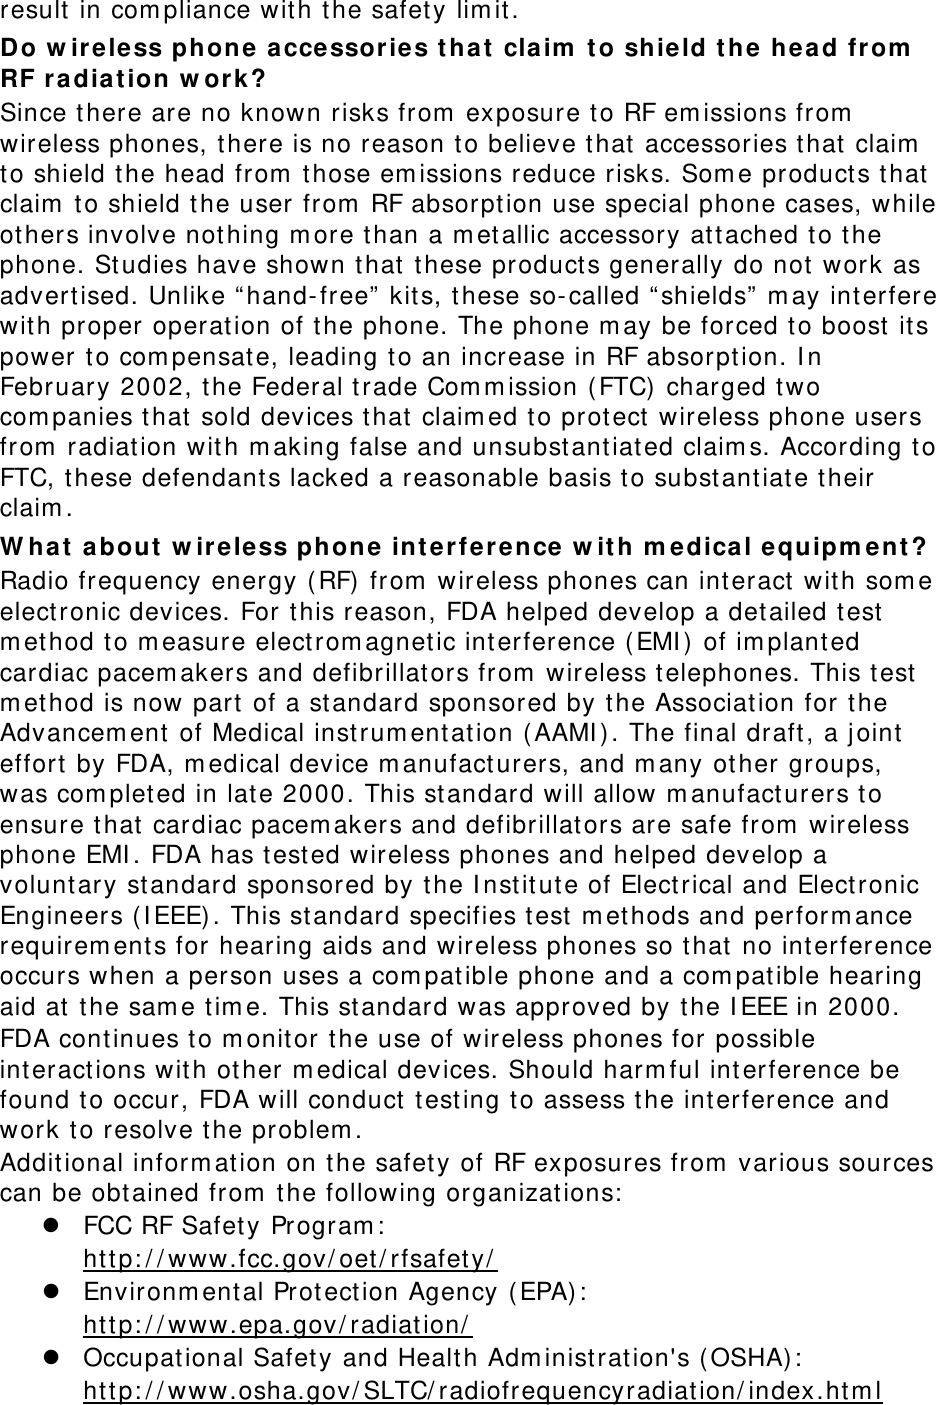 result  in com pliance with t he safet y lim it . Do w ireless phone a ccessor ies t ha t  claim  t o shield t he hea d fr om  RF r a diat ion w or k? Since t here are no known risks from  exposure t o RF em issions from  wireless phones, t here is no reason to believe that  accessories t hat claim  to shield t he head from  t hose em issions reduce risks. Som e product s that  claim  to shield t he user from  RF absorpt ion use special phone cases, while ot hers involve not hing m ore t han a m et allic accessory att ached to t he phone. St udies have shown that  t hese products gener ally do not work as advert ised. Unlike “ hand-free”  kits, t hese so-called “ shields”  m ay interfere wit h proper operat ion of t he phone. The phone m ay be forced t o boost  its power t o com pensat e, leading t o an increase in RF absorpt ion. I n February 2002, the Federal trade Com mission ( FTC) charged two com panies t hat sold devices t hat  claim ed t o protect wireless phone users from  radiation wit h m aking false and unsubstantiated claim s. According to FTC, these defendants lacked a reasonable basis t o subst antiate t heir claim . W ha t  a bout  w ir eless phon e  int erfe rence w it h m edica l equipm ent ? Radio frequency energy ( RF)  from  wireless phones can interact  w it h som e electronic devices. For t his r eason, FDA helped develop a det ailed test  m et hod t o m easure elect rom agnet ic int erference ( EMI ) of im plant ed cardiac pacem akers and defibrillat ors from  wireless telephones. This t est  m et hod is now part of a st andard sponsored by t he Association for t he Advancem ent  of Medical inst rum entat ion ( AAMI ) . The final draft, a j oint  effort  by FDA, m edical device m anufact urers, and m any ot her groups, was com pleted in lat e 2000. This standard will allow m anufact urers t o ensure that cardiac pacem akers and defibrillators are safe from  wireless phone EMI . FDA has t est ed wireless phones and helped develop a volunt ary st andar d sponsored by the I nst it ute of Electrical and Elect ronic Engineers ( I EEE) . This st andard specifies t est  m ethods and perform ance requirem ent s for hearing aids and wireless phones so t hat  no int erference occurs when a person uses a com pat ible phone and a com pat ible hearing aid at  t he sam e t im e. This st andard was approved by t he I EEE in 2000. FDA continues t o m onit or t he use of w ir eless phones for possible int eract ions wit h ot her m edical devices. Should harm ful int er ference be found t o occur, FDA w ill conduct  t est ing t o assess t he interference and work to resolve the problem . Additional inform at ion on t he safety of RF exposures from  various sources can be obt ained from  t he following or ganizations:   FCC RF Safety Program :   ht t p: / / ww w.fcc.gov/ oet/ rfsafet y/   Environm ental Prot ect ion Agency ( EPA) :   ht t p: / / ww w.epa.gov / radiat ion/   Occupat ional Safet y  and Healt h Adm inist rat ion&apos;s ( OSHA) :         ht t p: / / ww w.osha.gov/ SLTC/ radiofr equencyradiat ion/ index.ht m l 